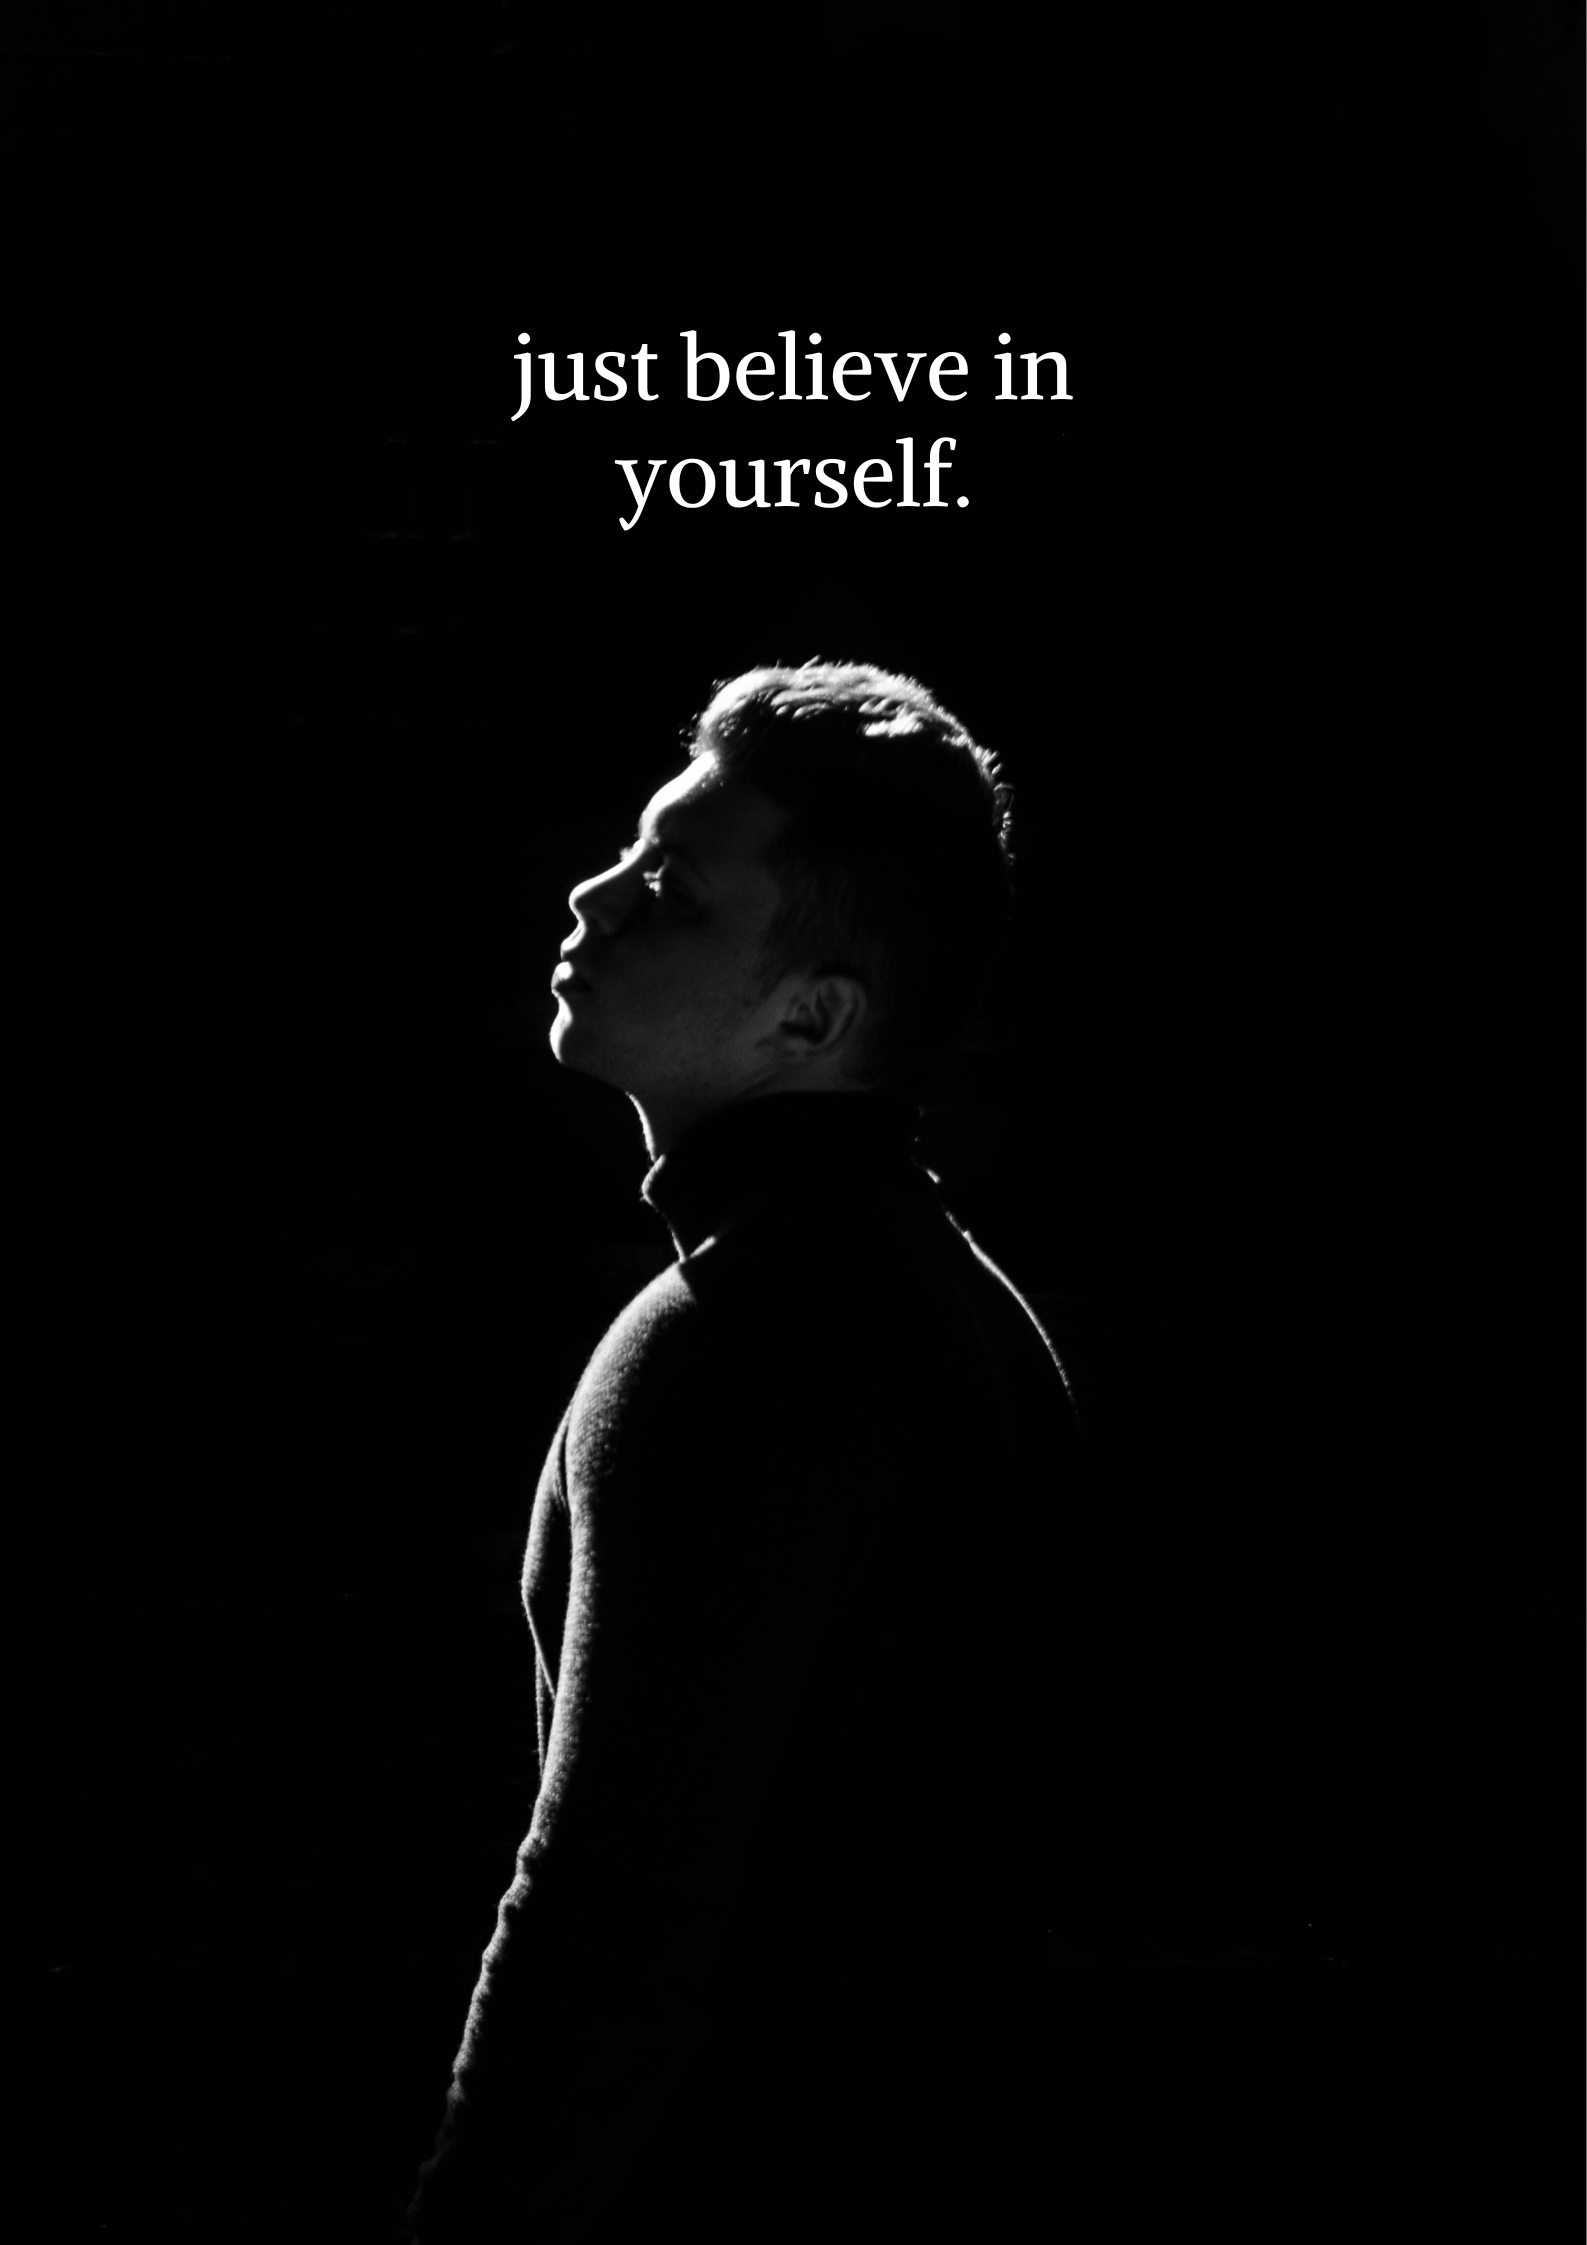 Silhouette of a man facing backward against a solid black background, with the motivational phrase 'Just believe in yourself' above his head, representing the power of self-belief and the inspiring quotes about success, courage, and determination shared in the post.